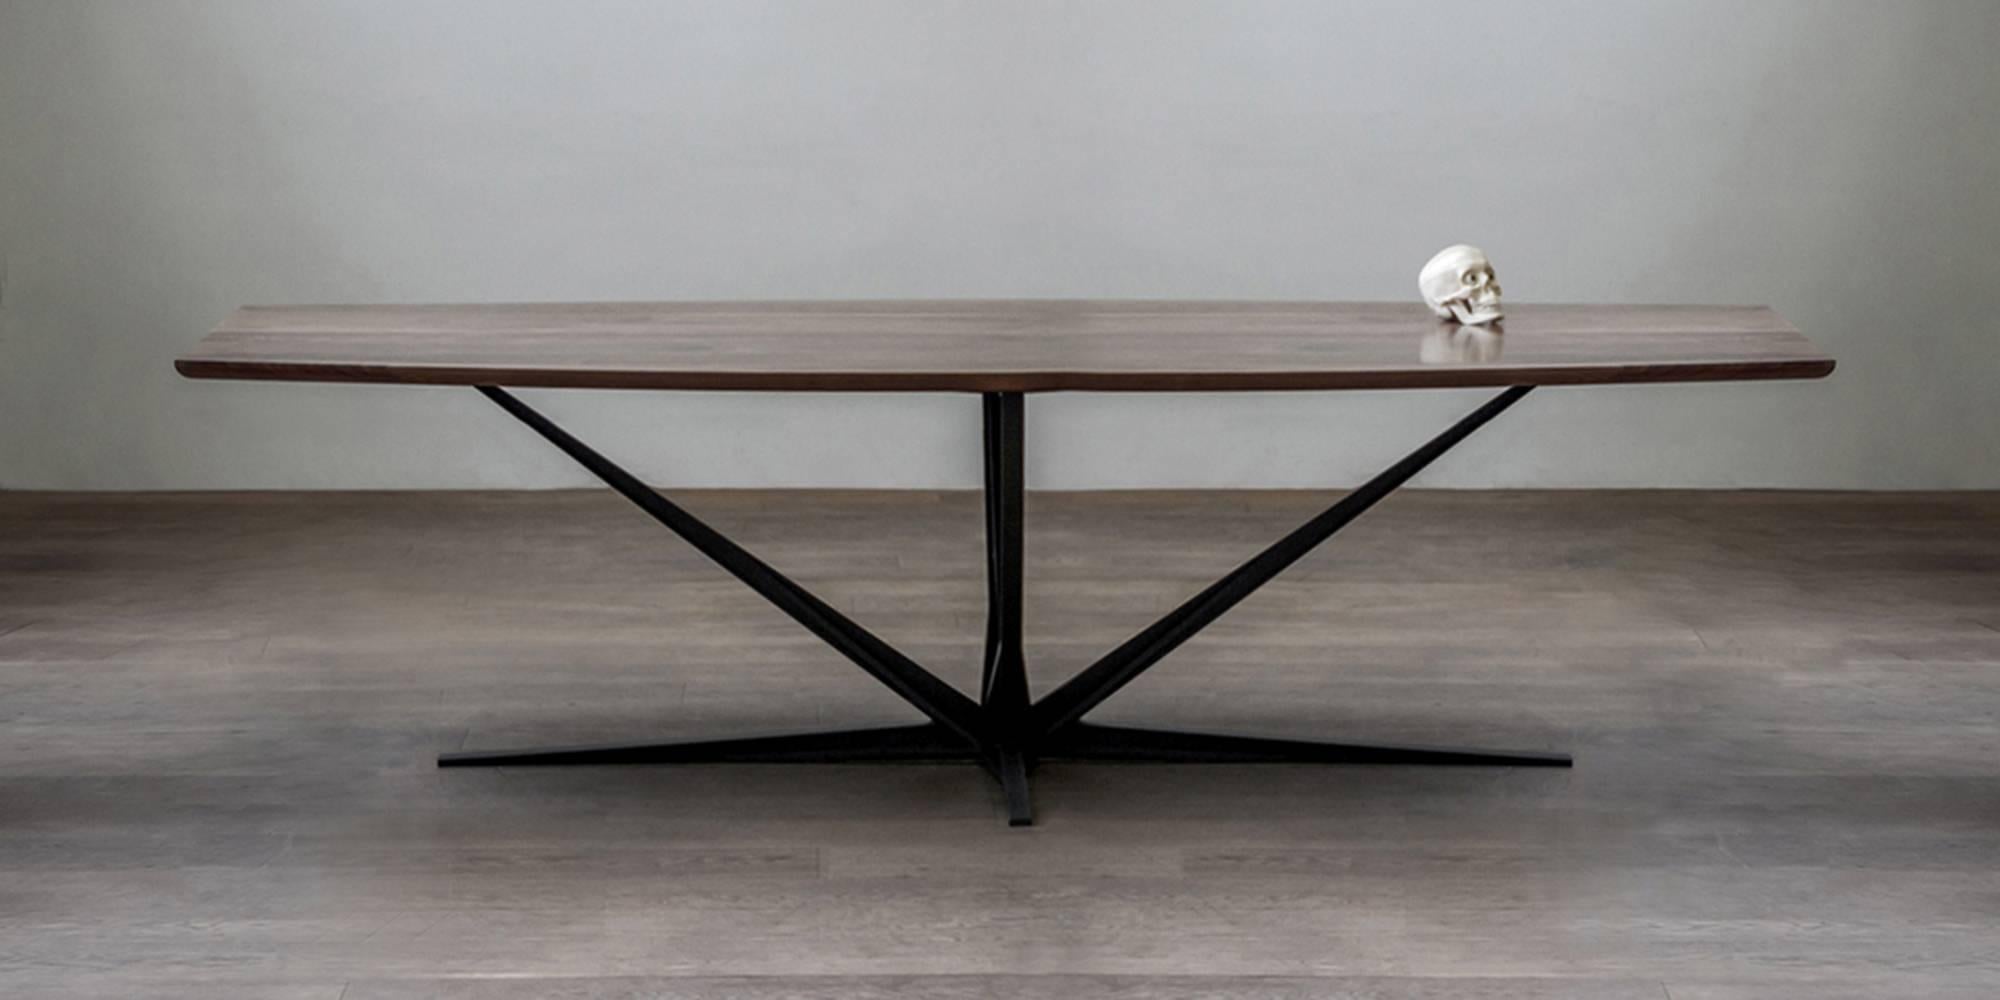 Mexican Luteca Agave Table Handcrafted in Mexico 'Modern Design'